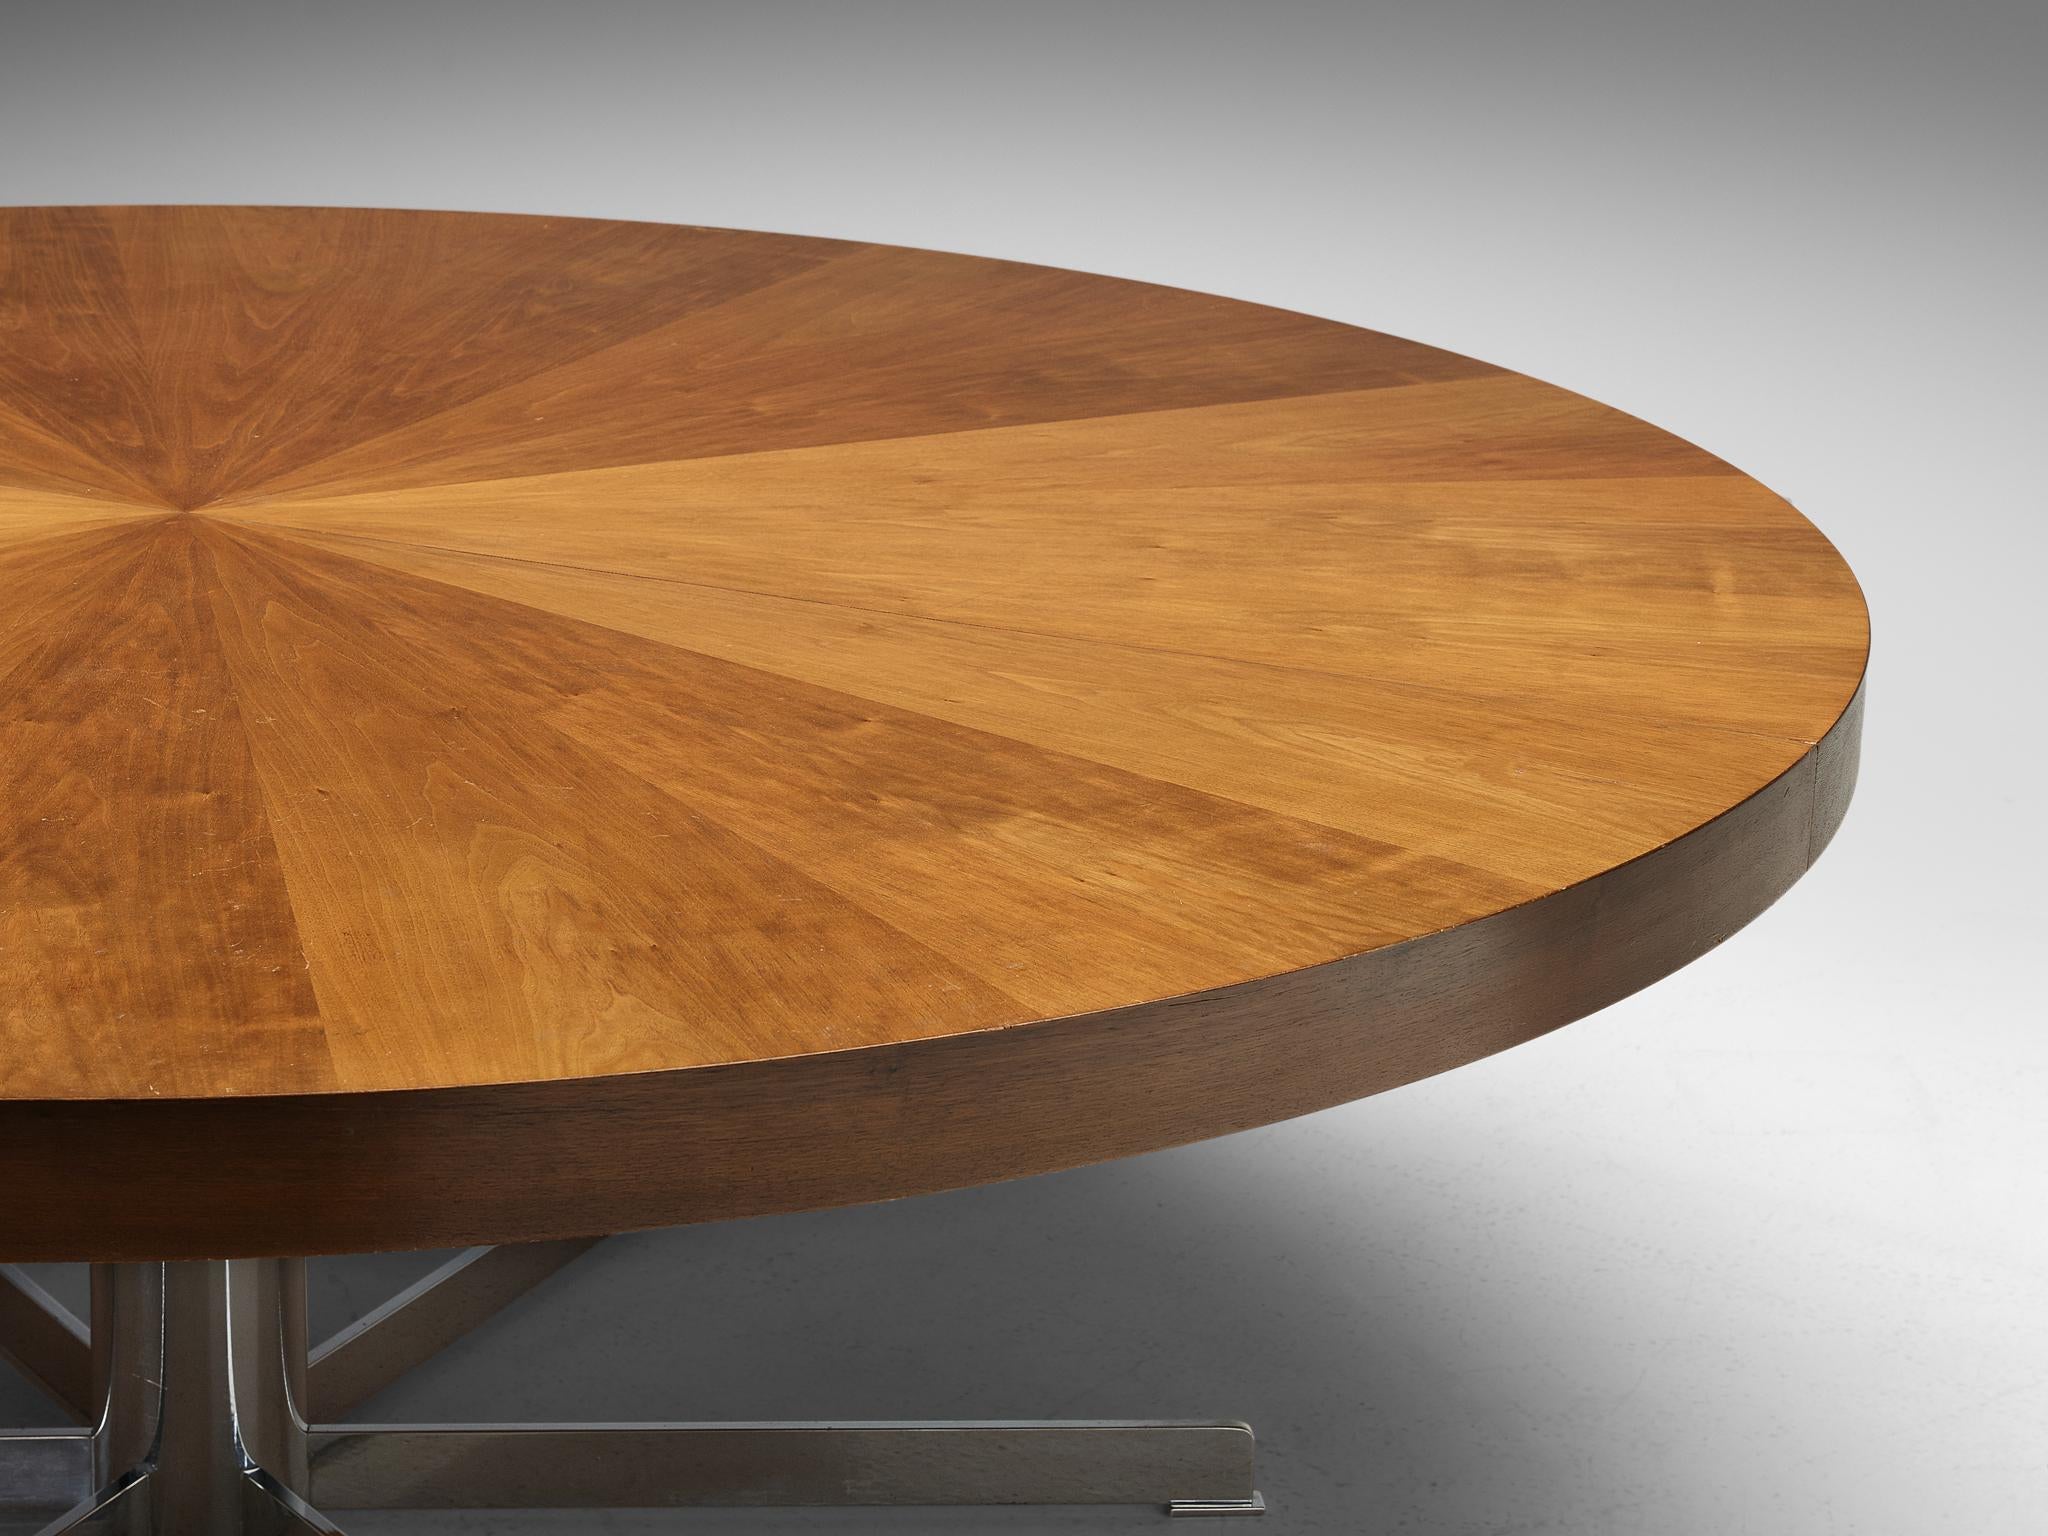 large round conference table